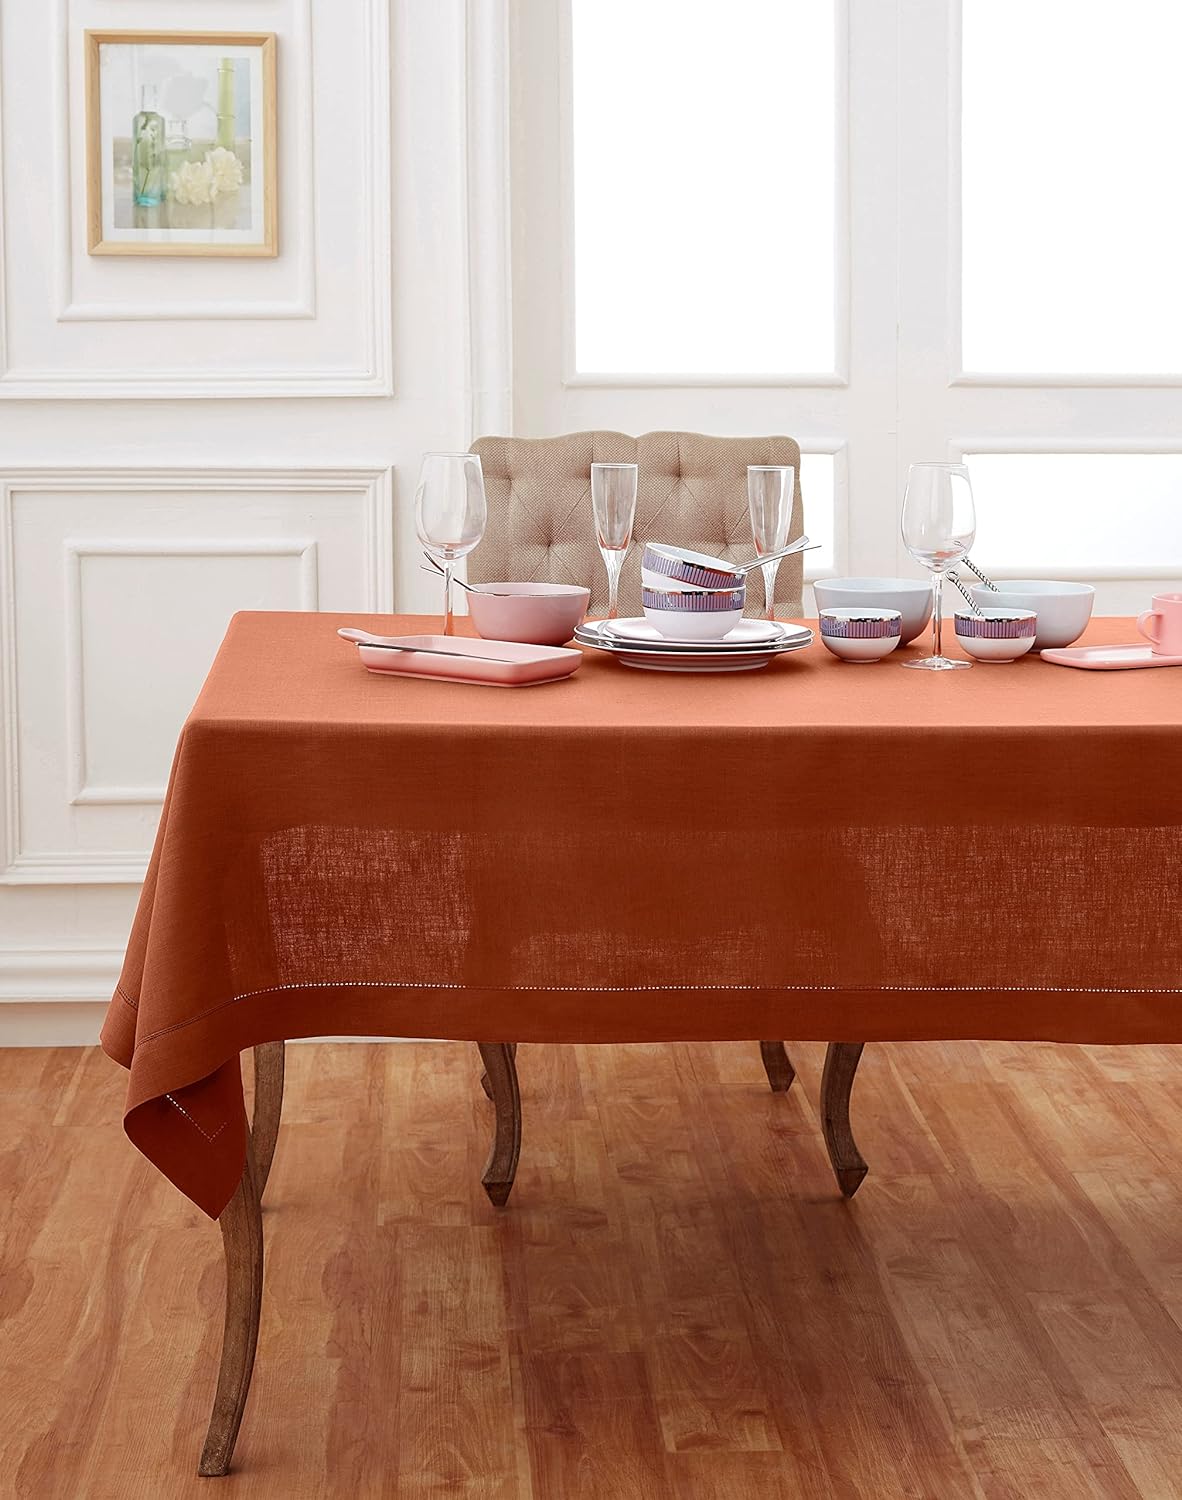 Hemstitched Table Linens (Cinnamon Color)